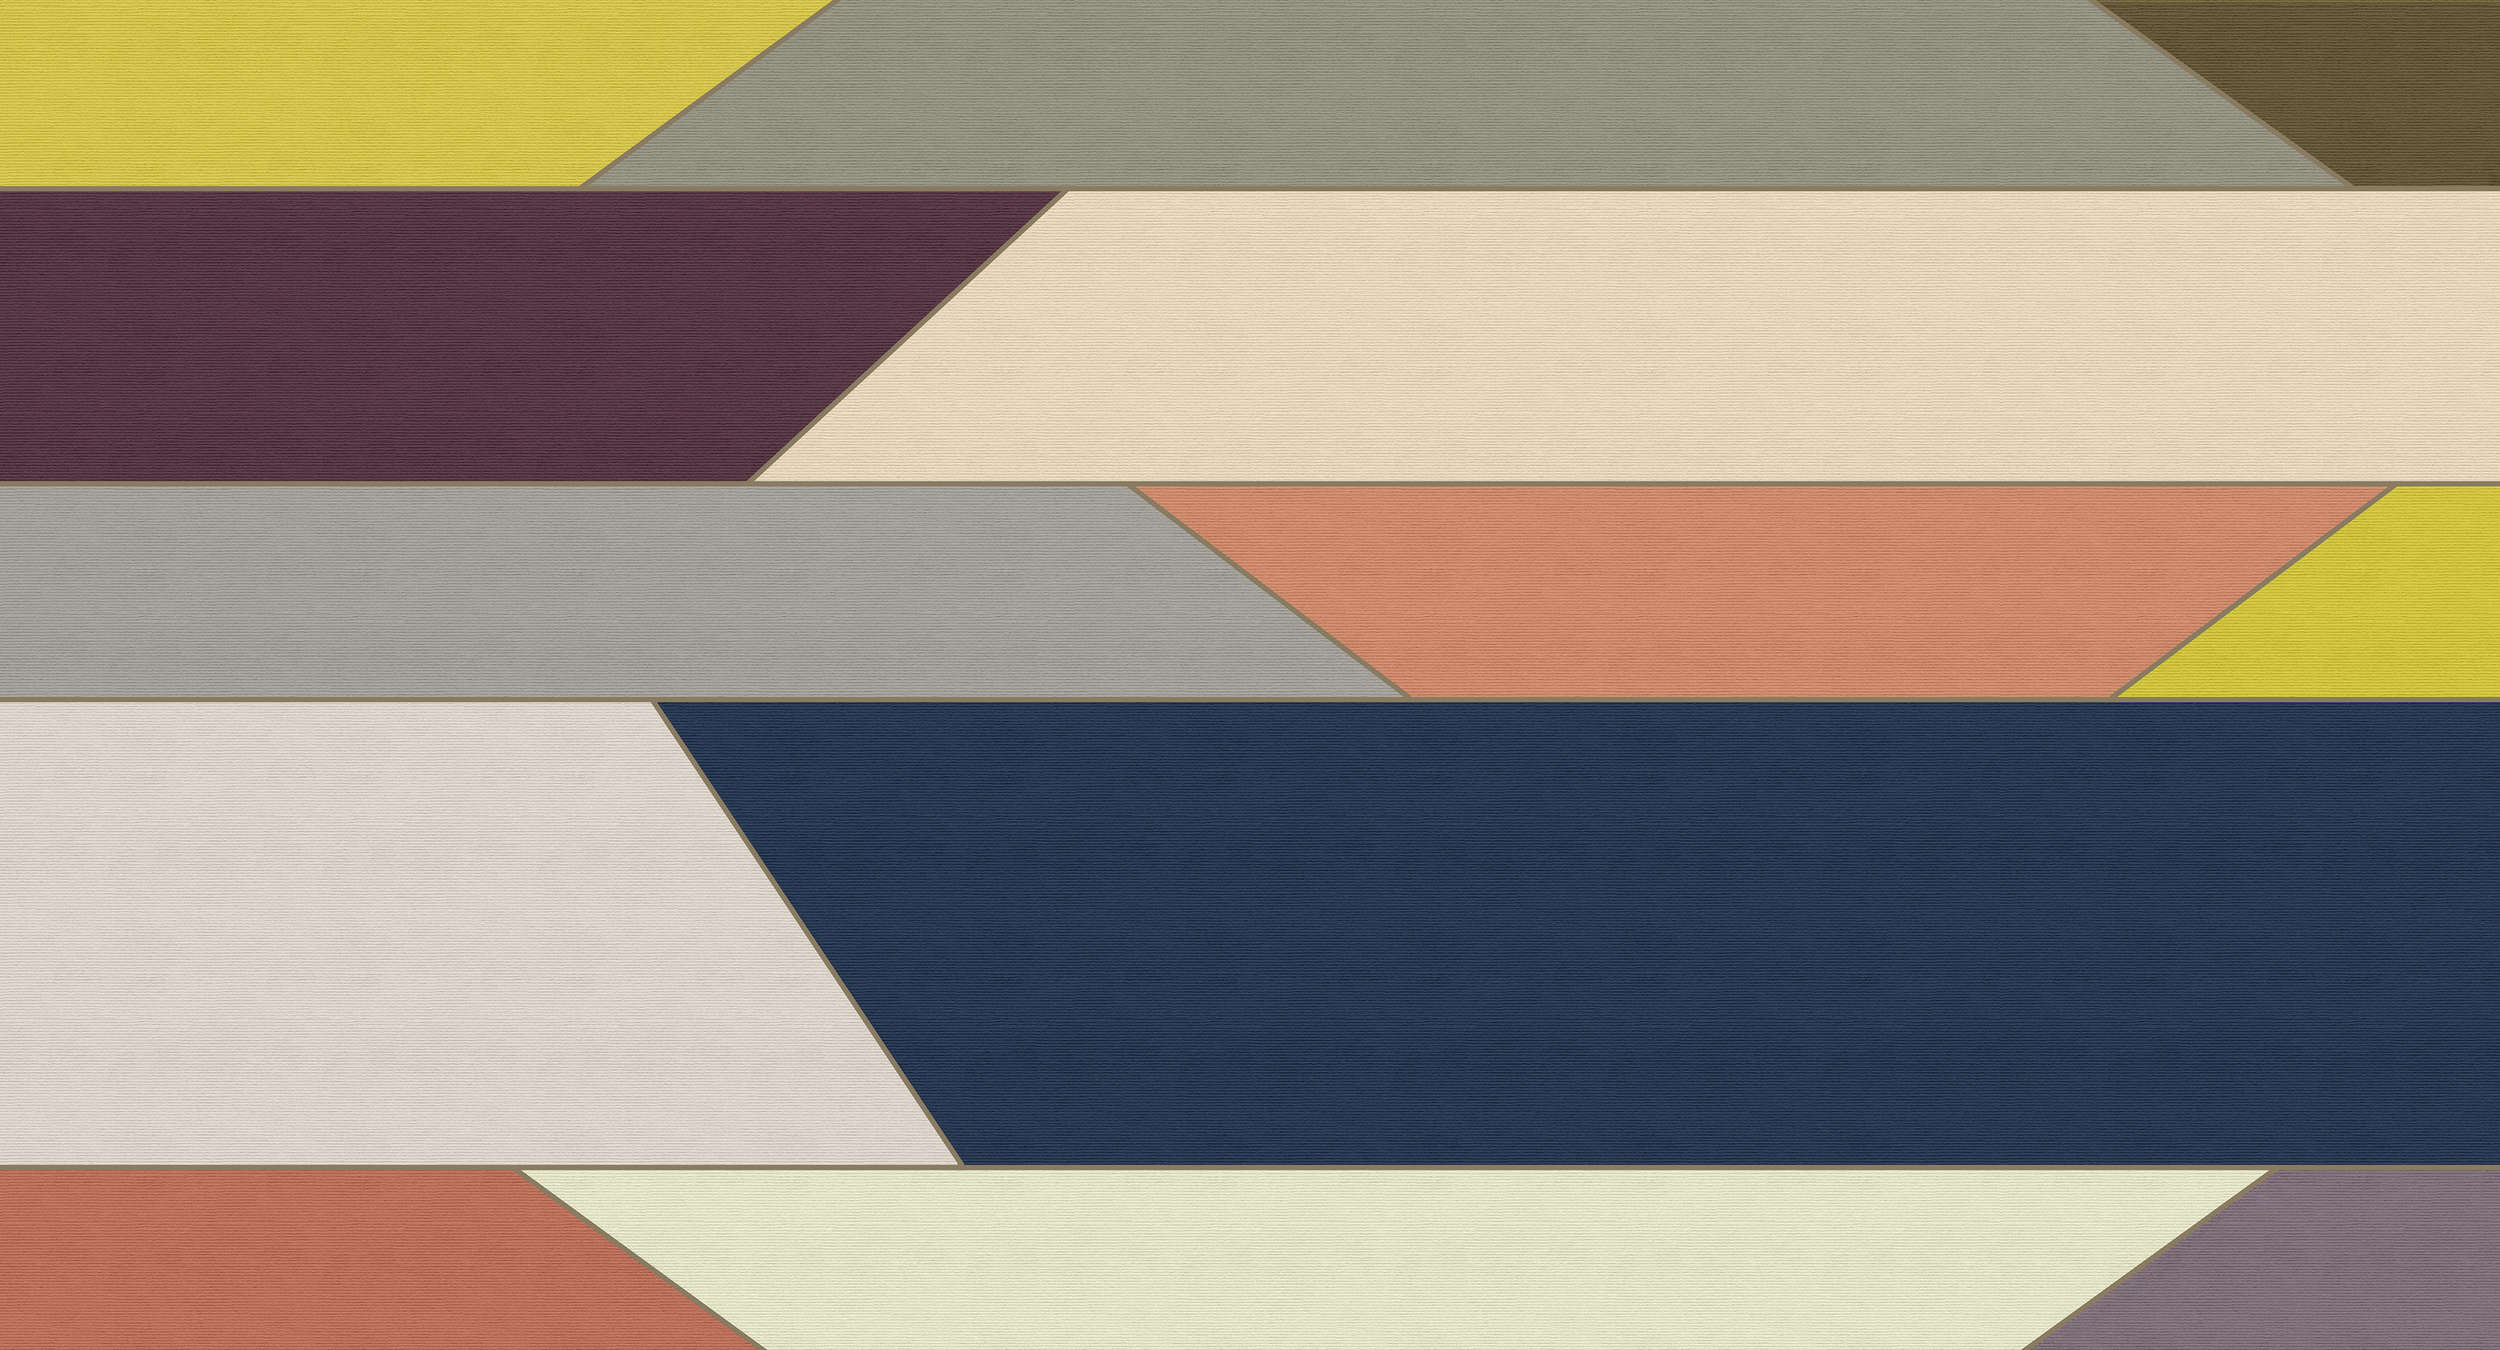             Geometry 1 - Photo wallpaper with multicoloured horizontal stripe pattern - ribbed structure - Beige, Blue | Pearl smooth fleece
        